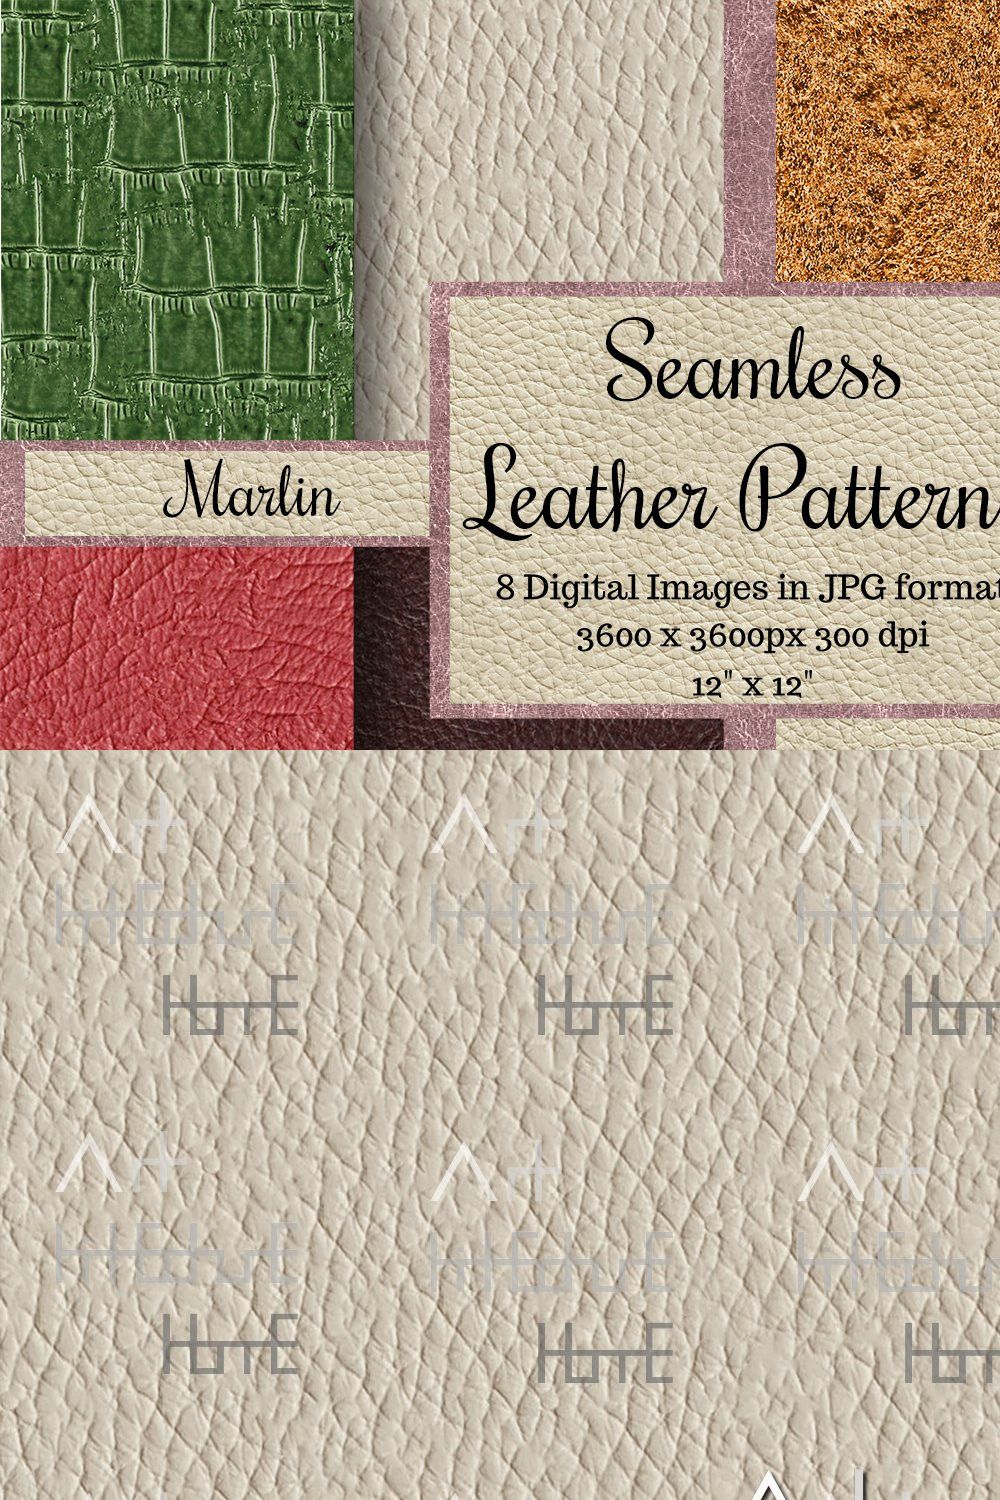 Seamless Leather Patterns - Marlin pinterest preview image.